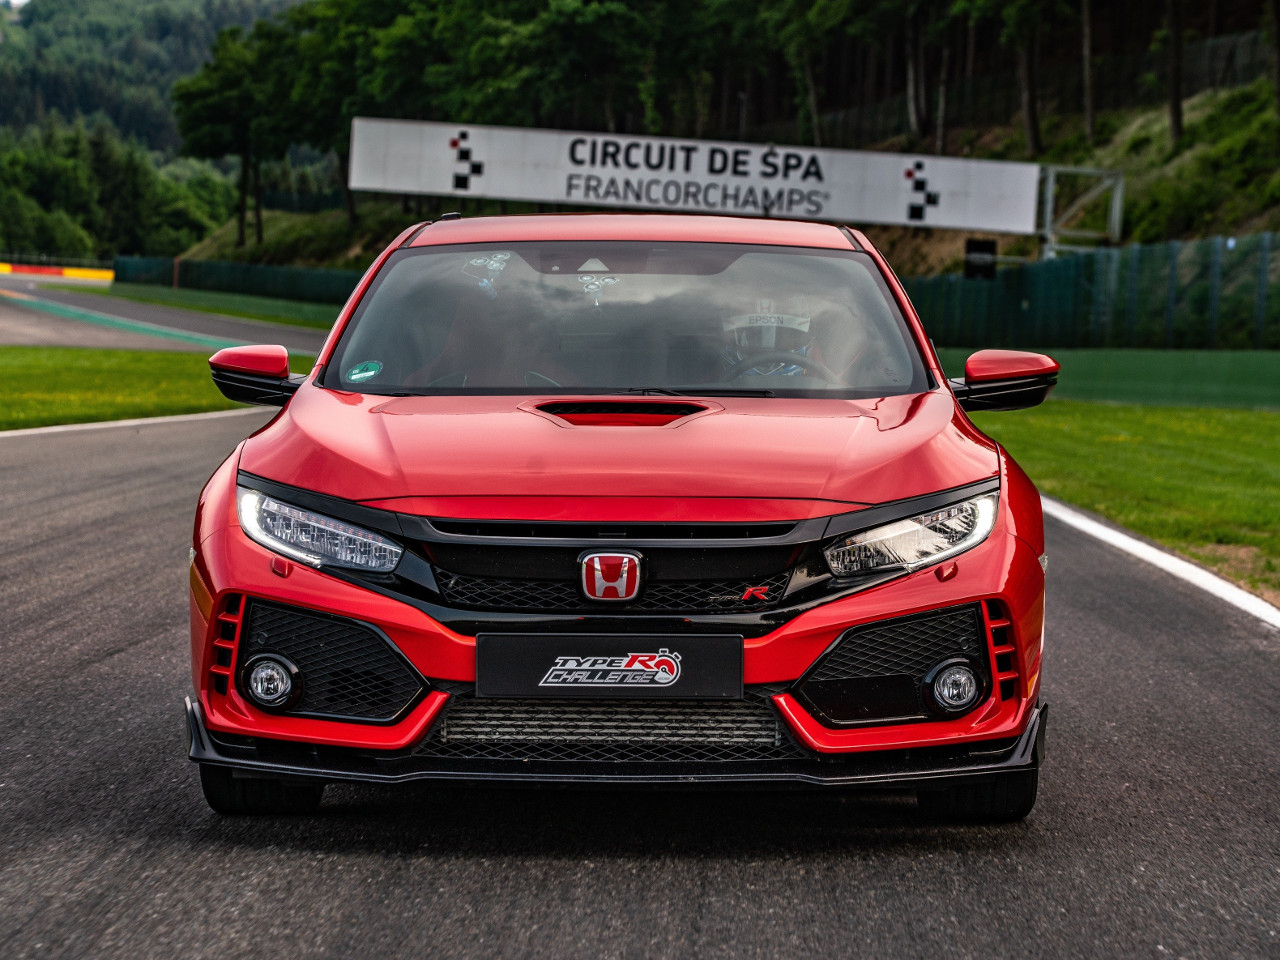 Type R at Francorchamps - Front view